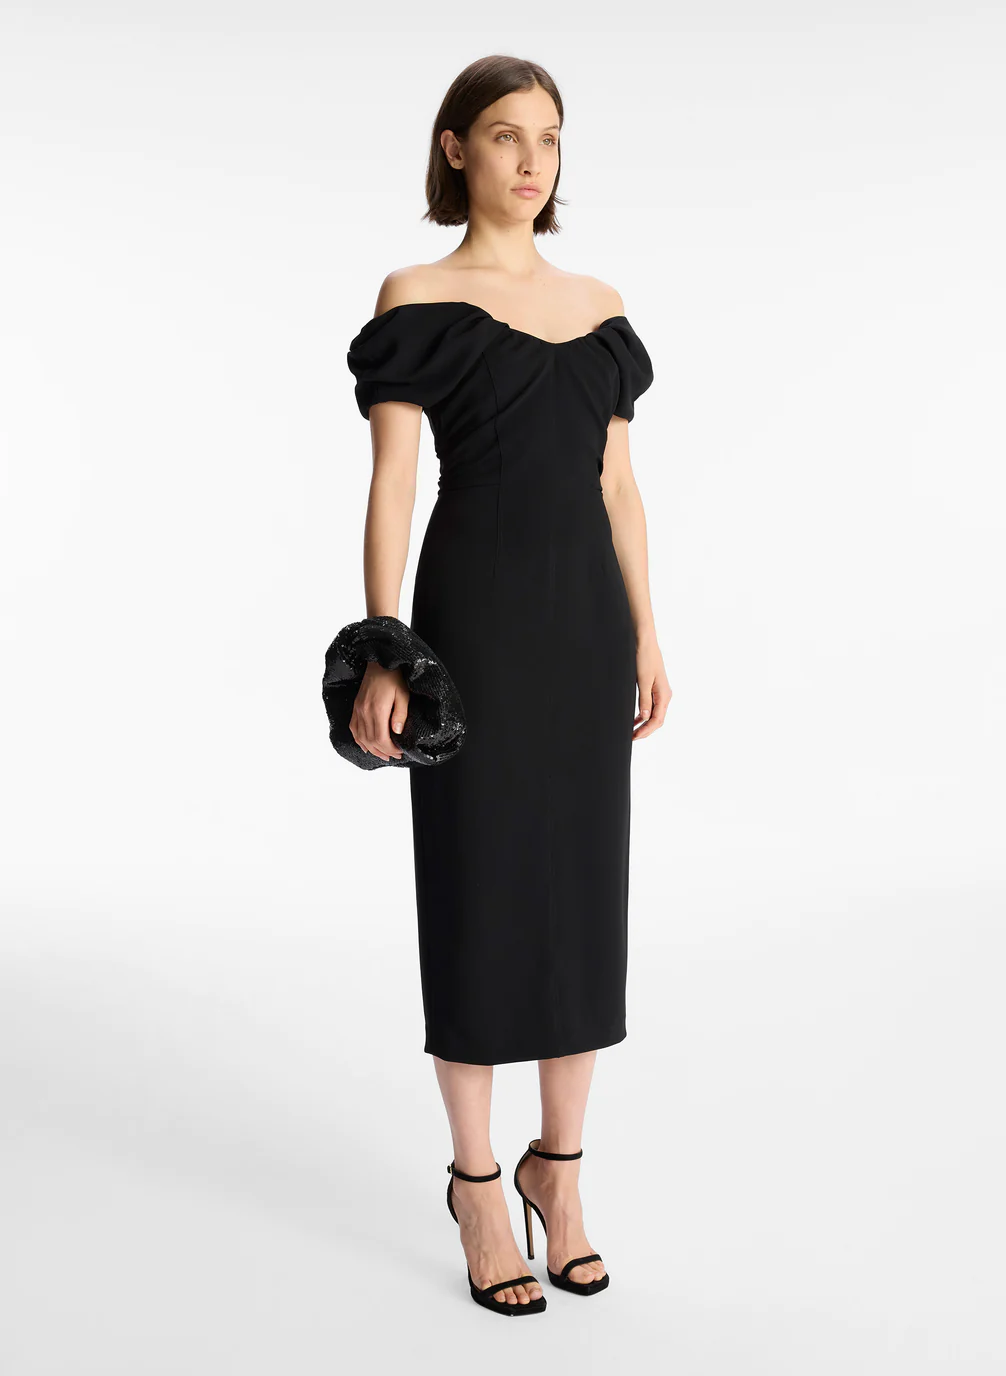 A.L.C Nora Dress in Black available at The New Trend Australia.